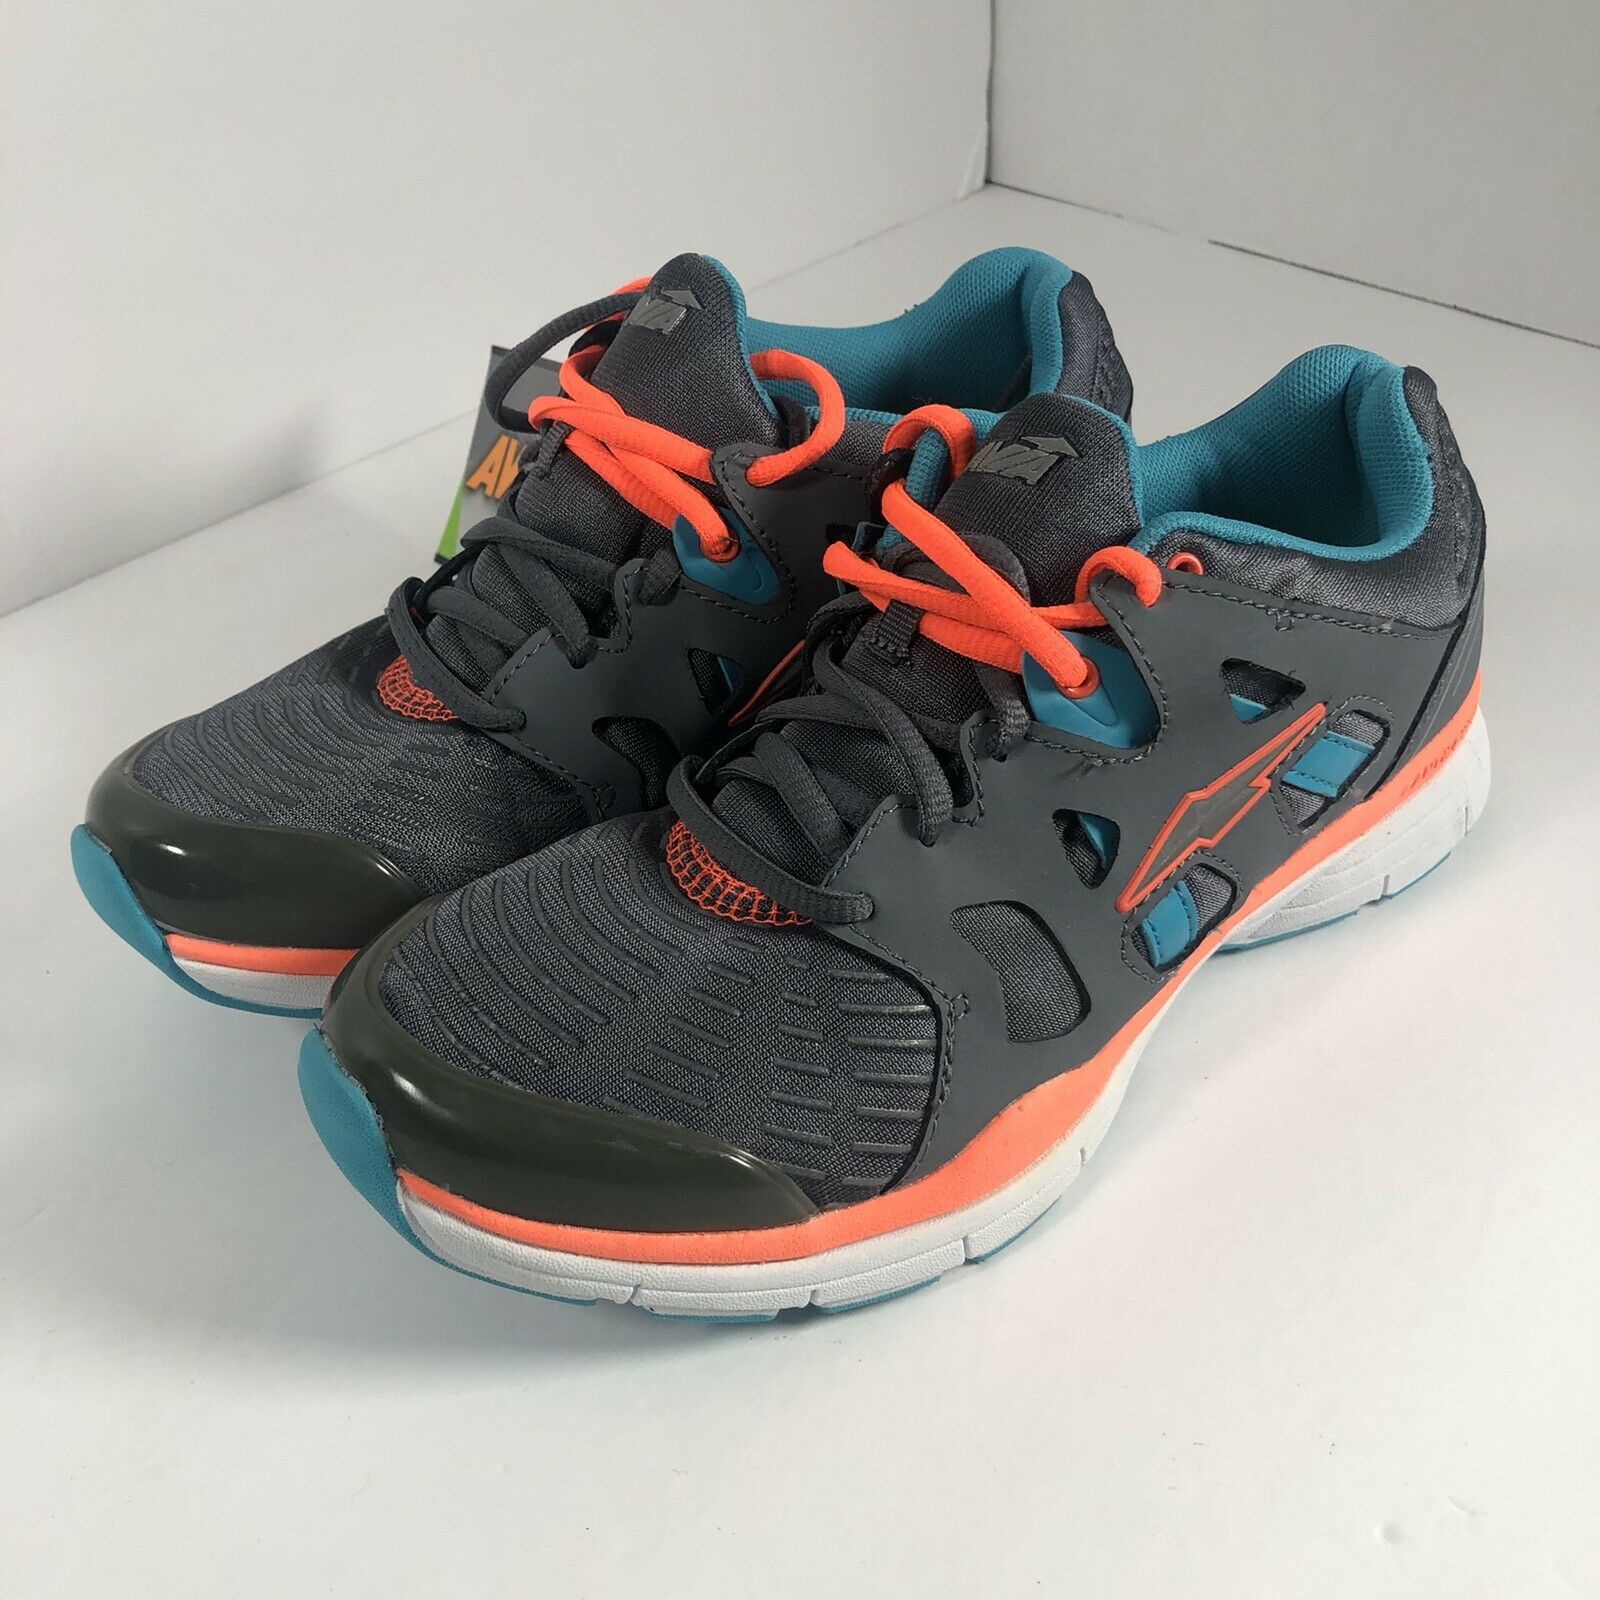 Avia Cantilever Athletic Shoes Women's Size 7.5 Gray Coral WMA14400009